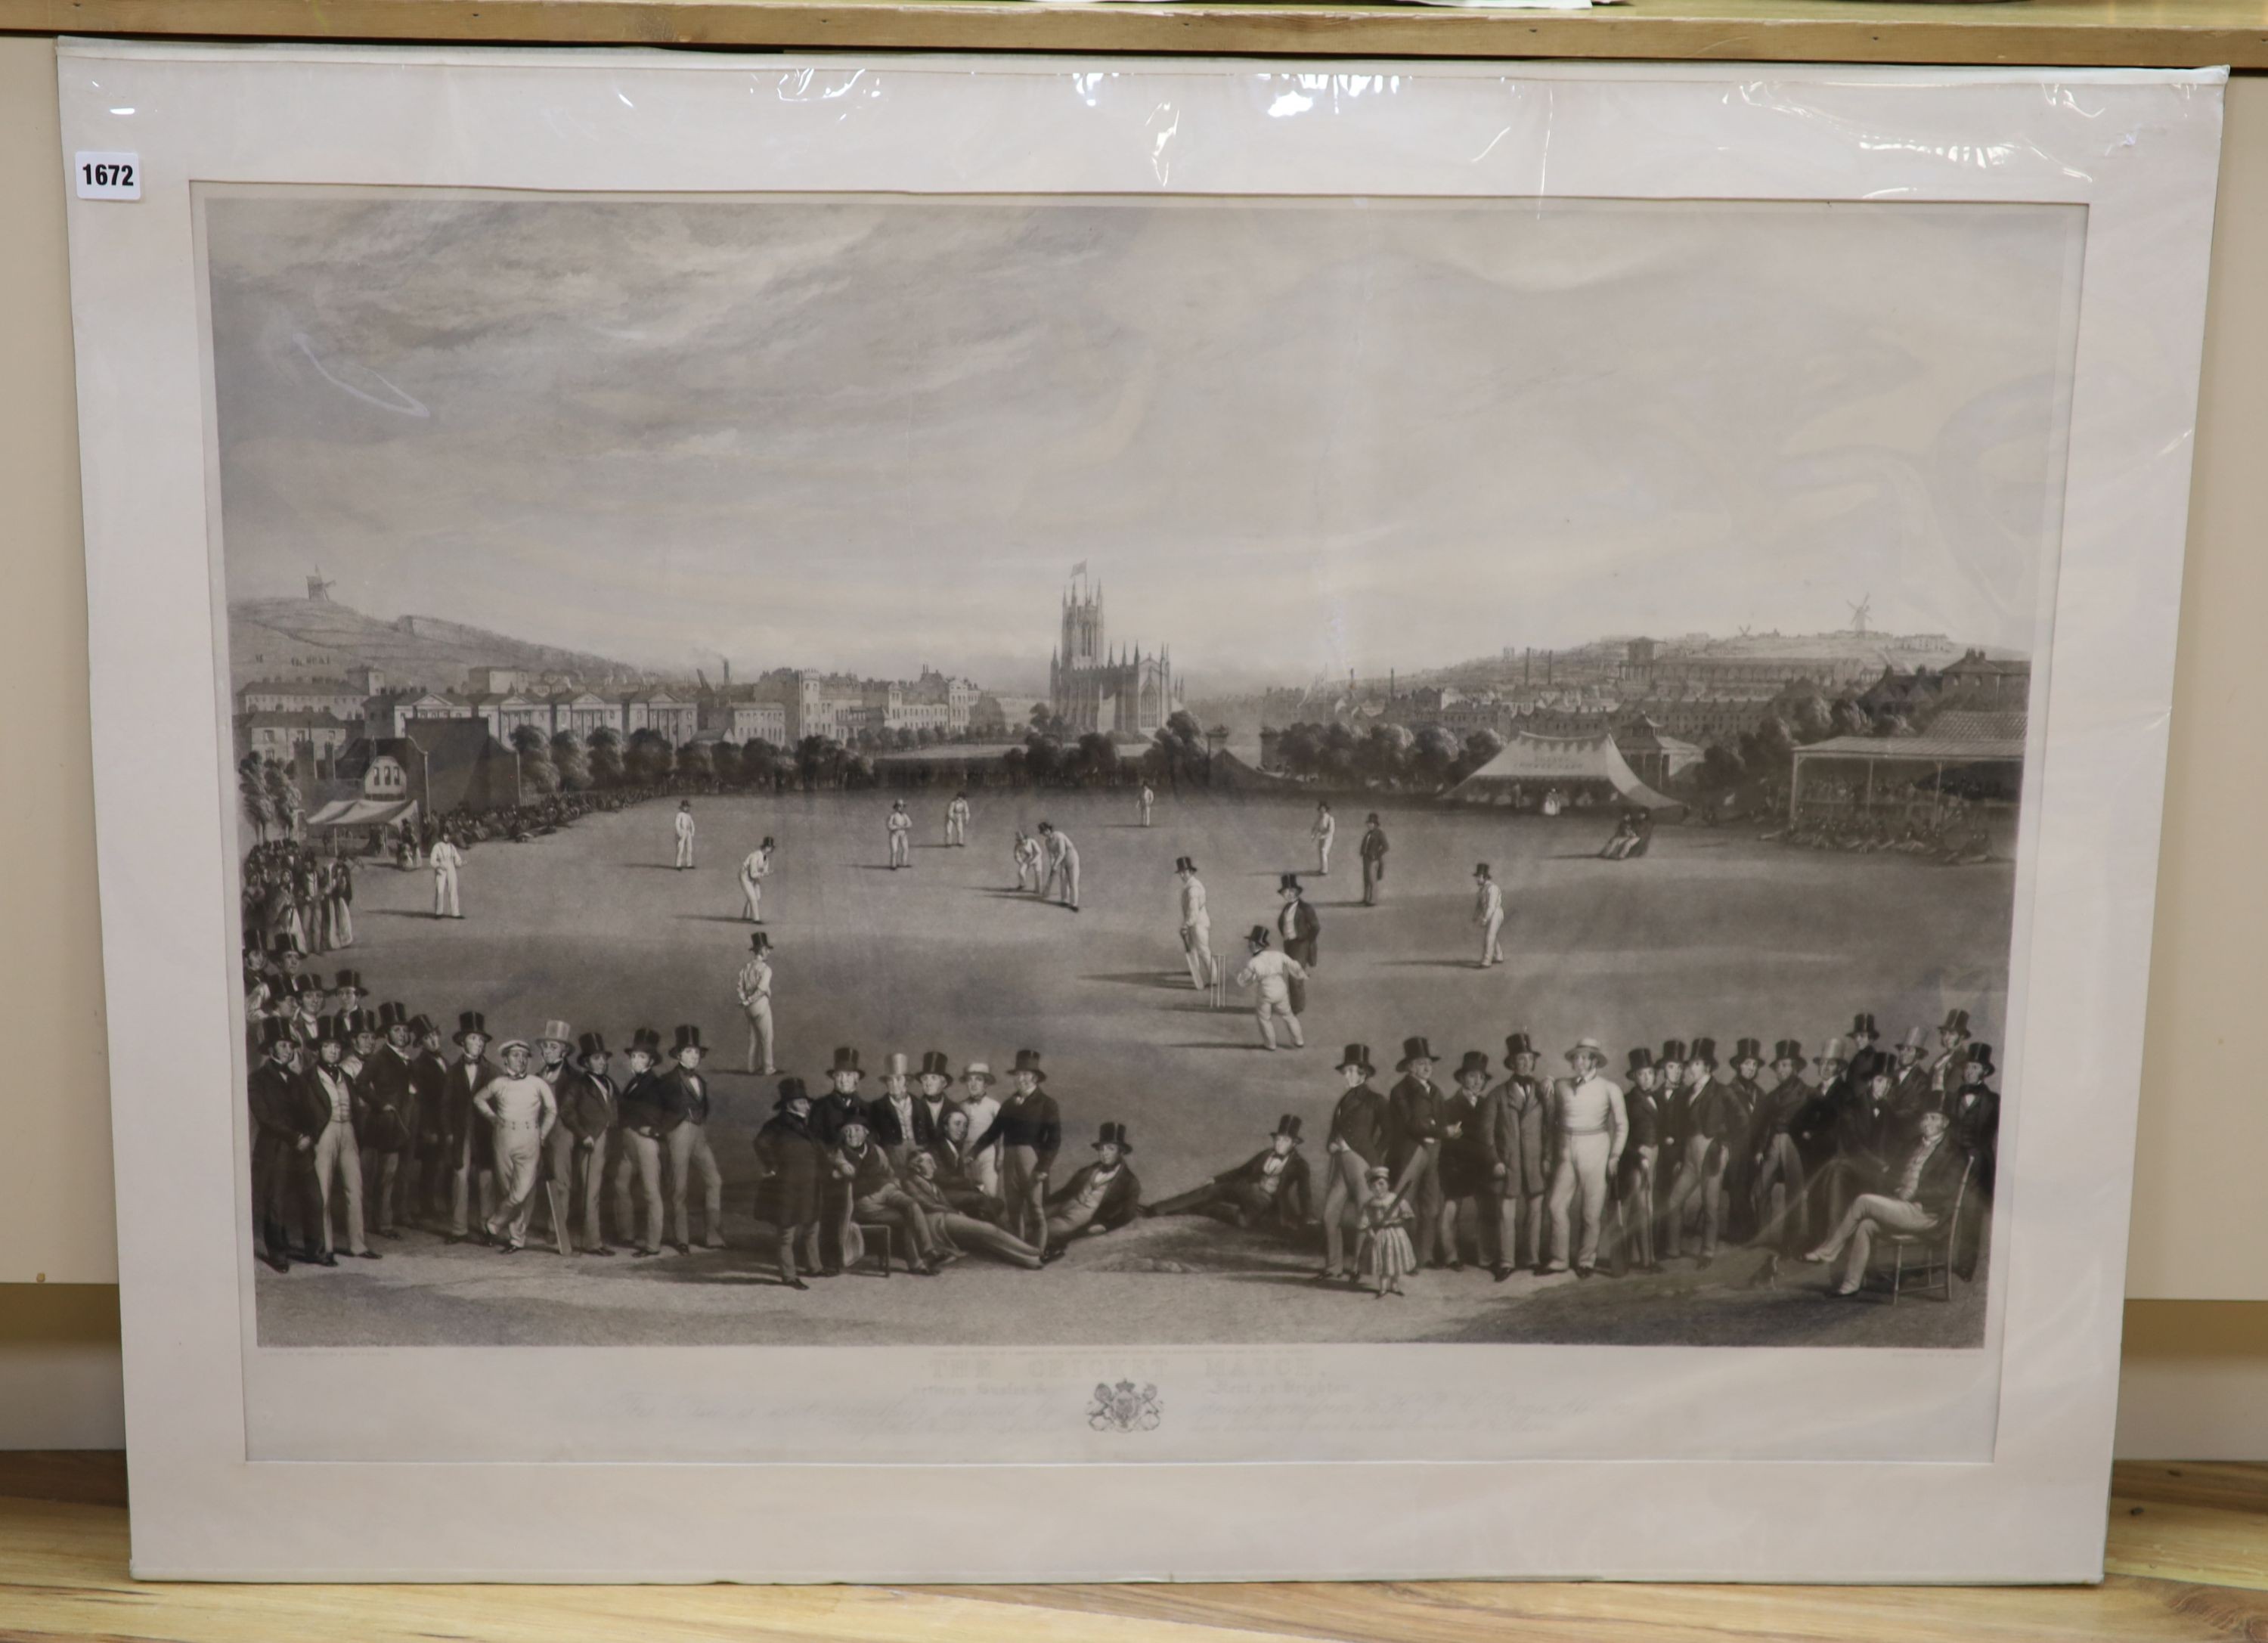 Phillips after Drummond and Basebe, engraving, The Cricket Match between Sussex and Kent at Brighton, overall 67 x 93cm, unframed